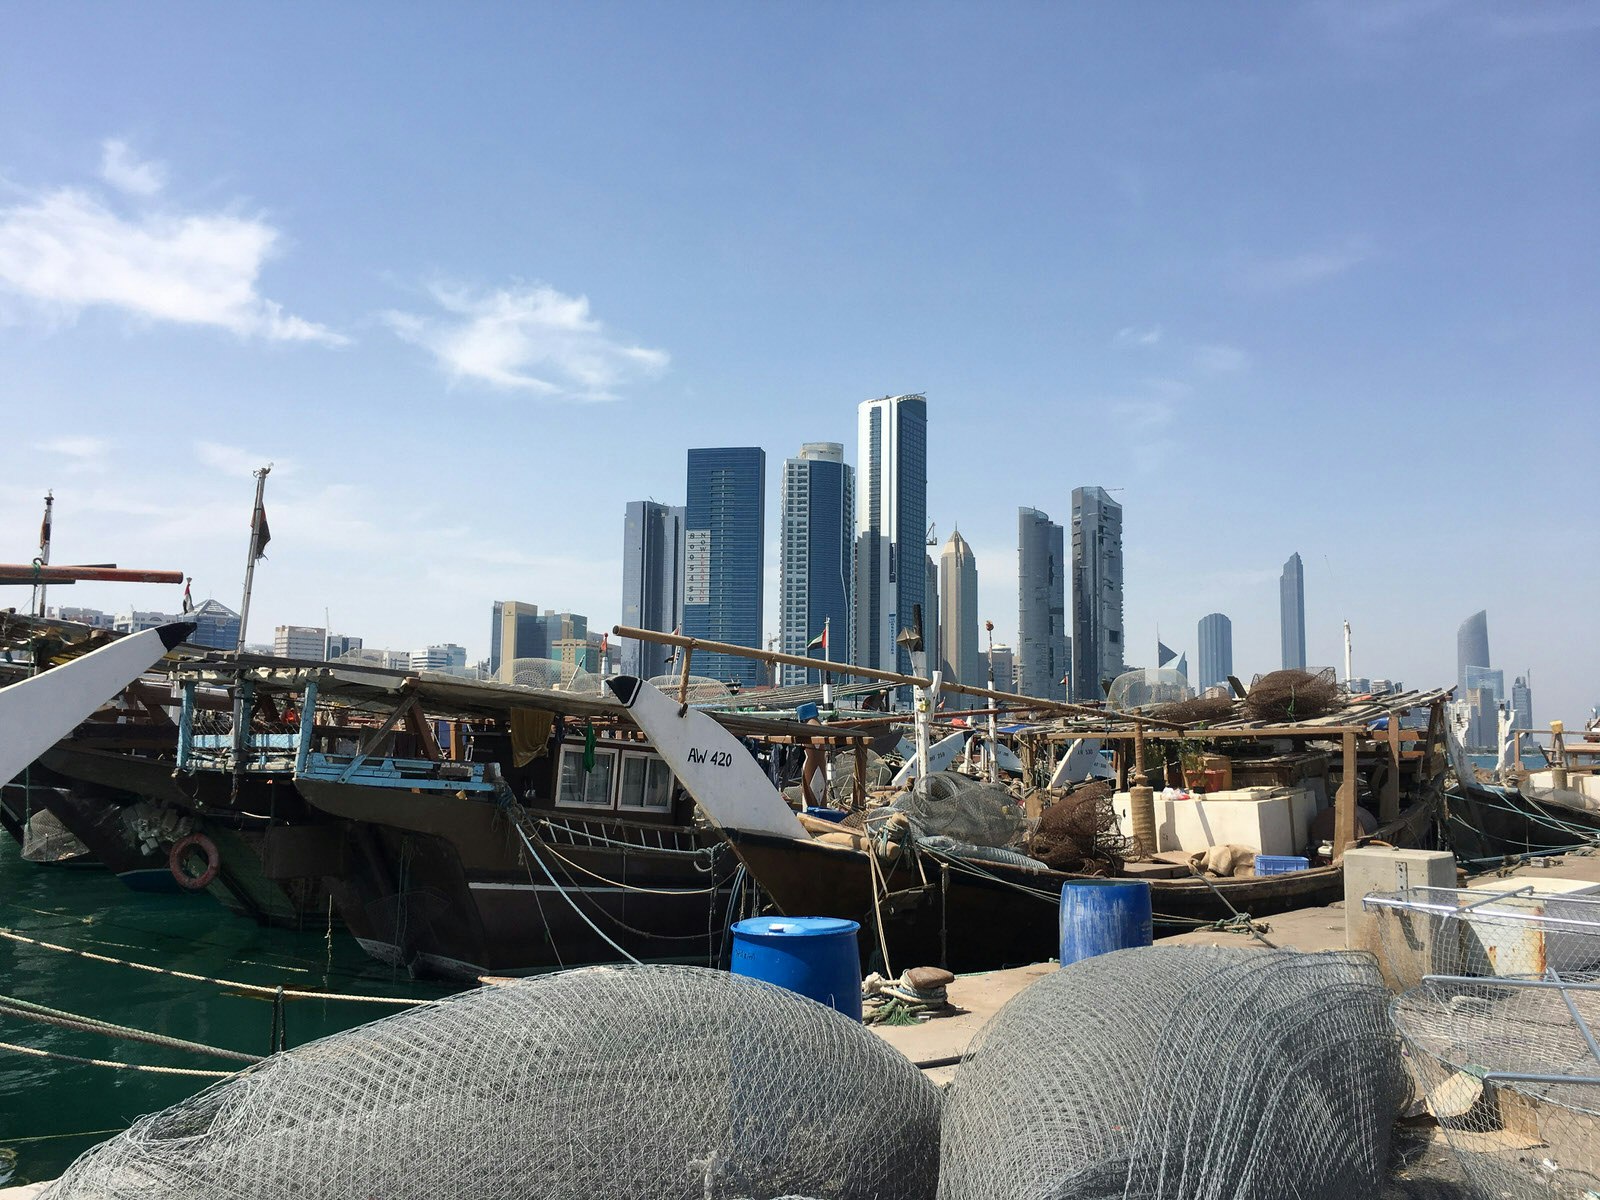 Lobster pots and docked dhows at the dhow harbour in Abu Dhabi, United Arab Emirates